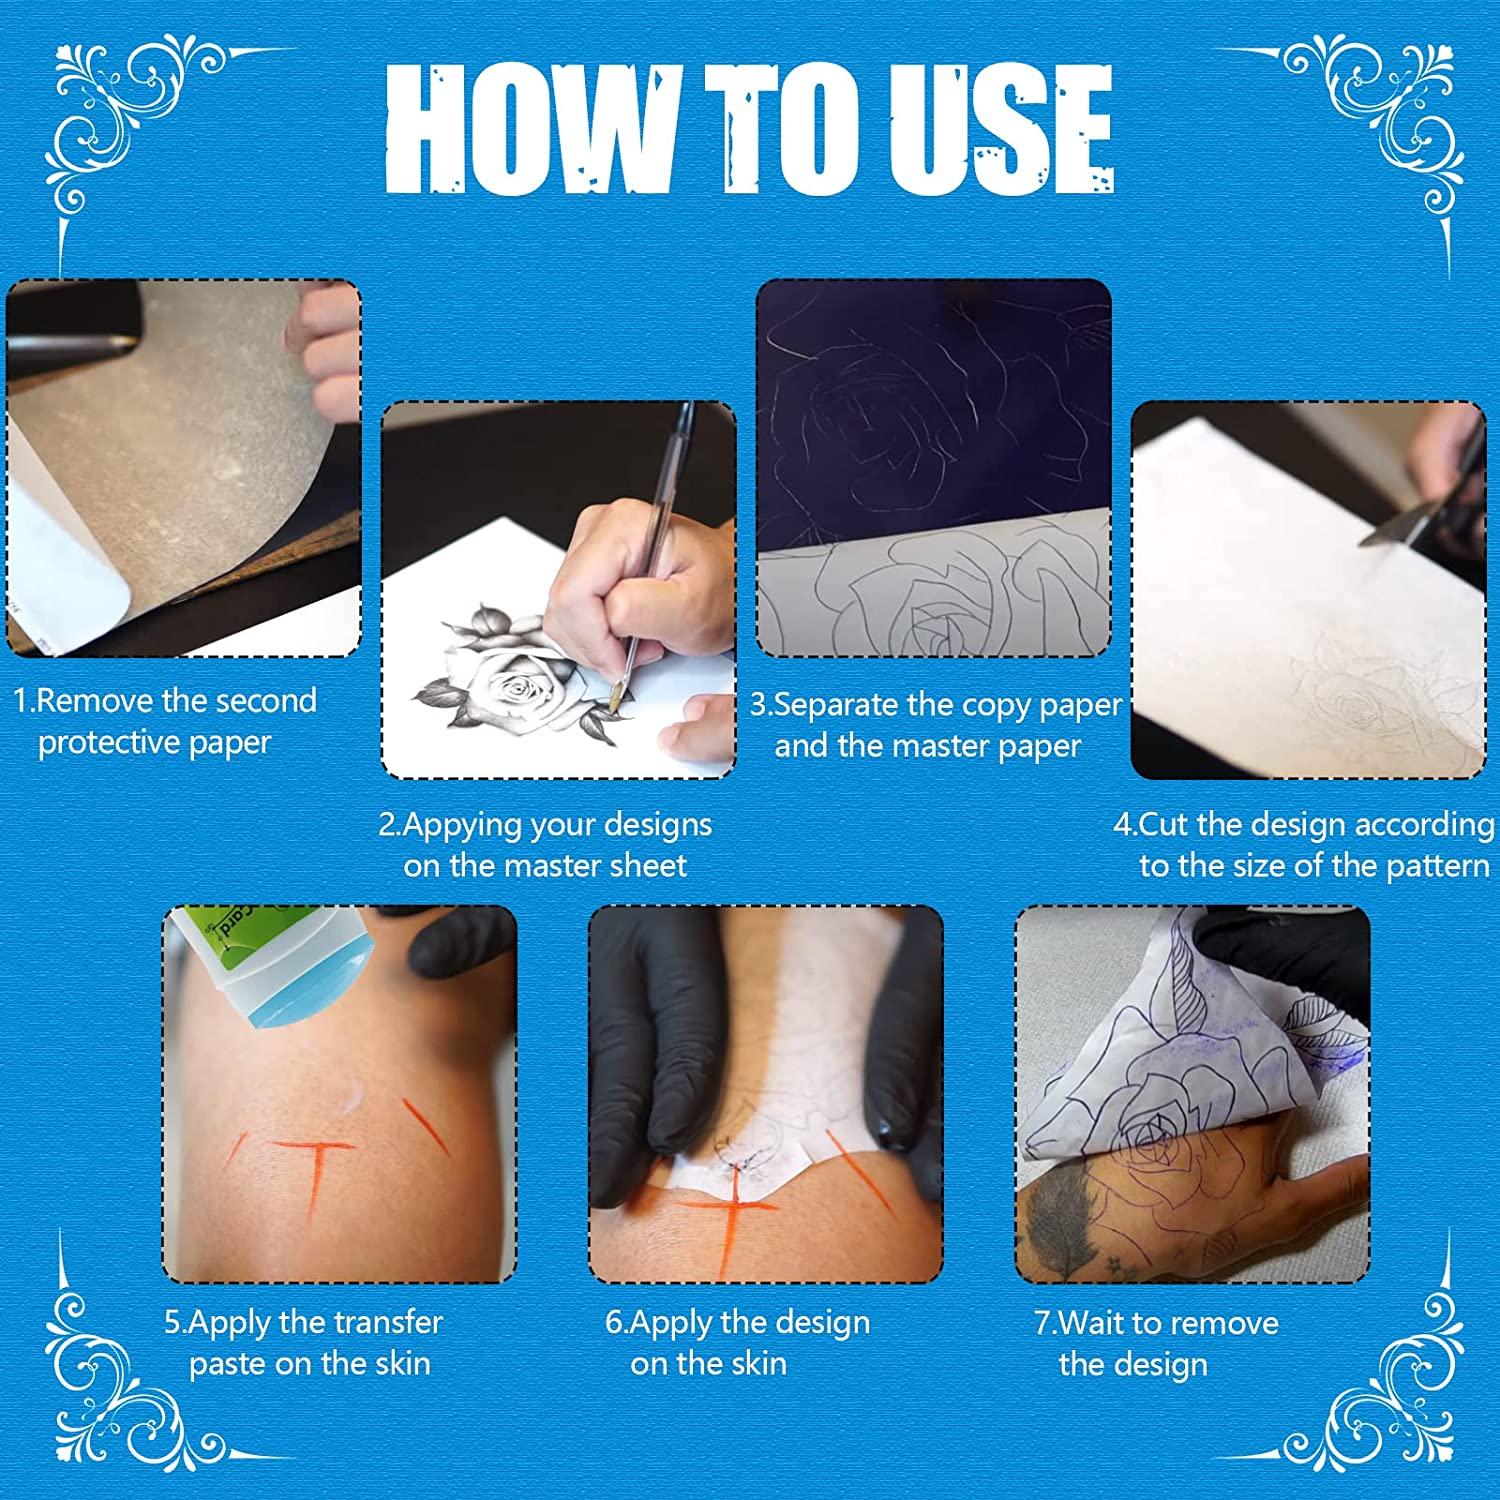 How to Transfer a Carbon Paper Tattoo to the Skin, eHow